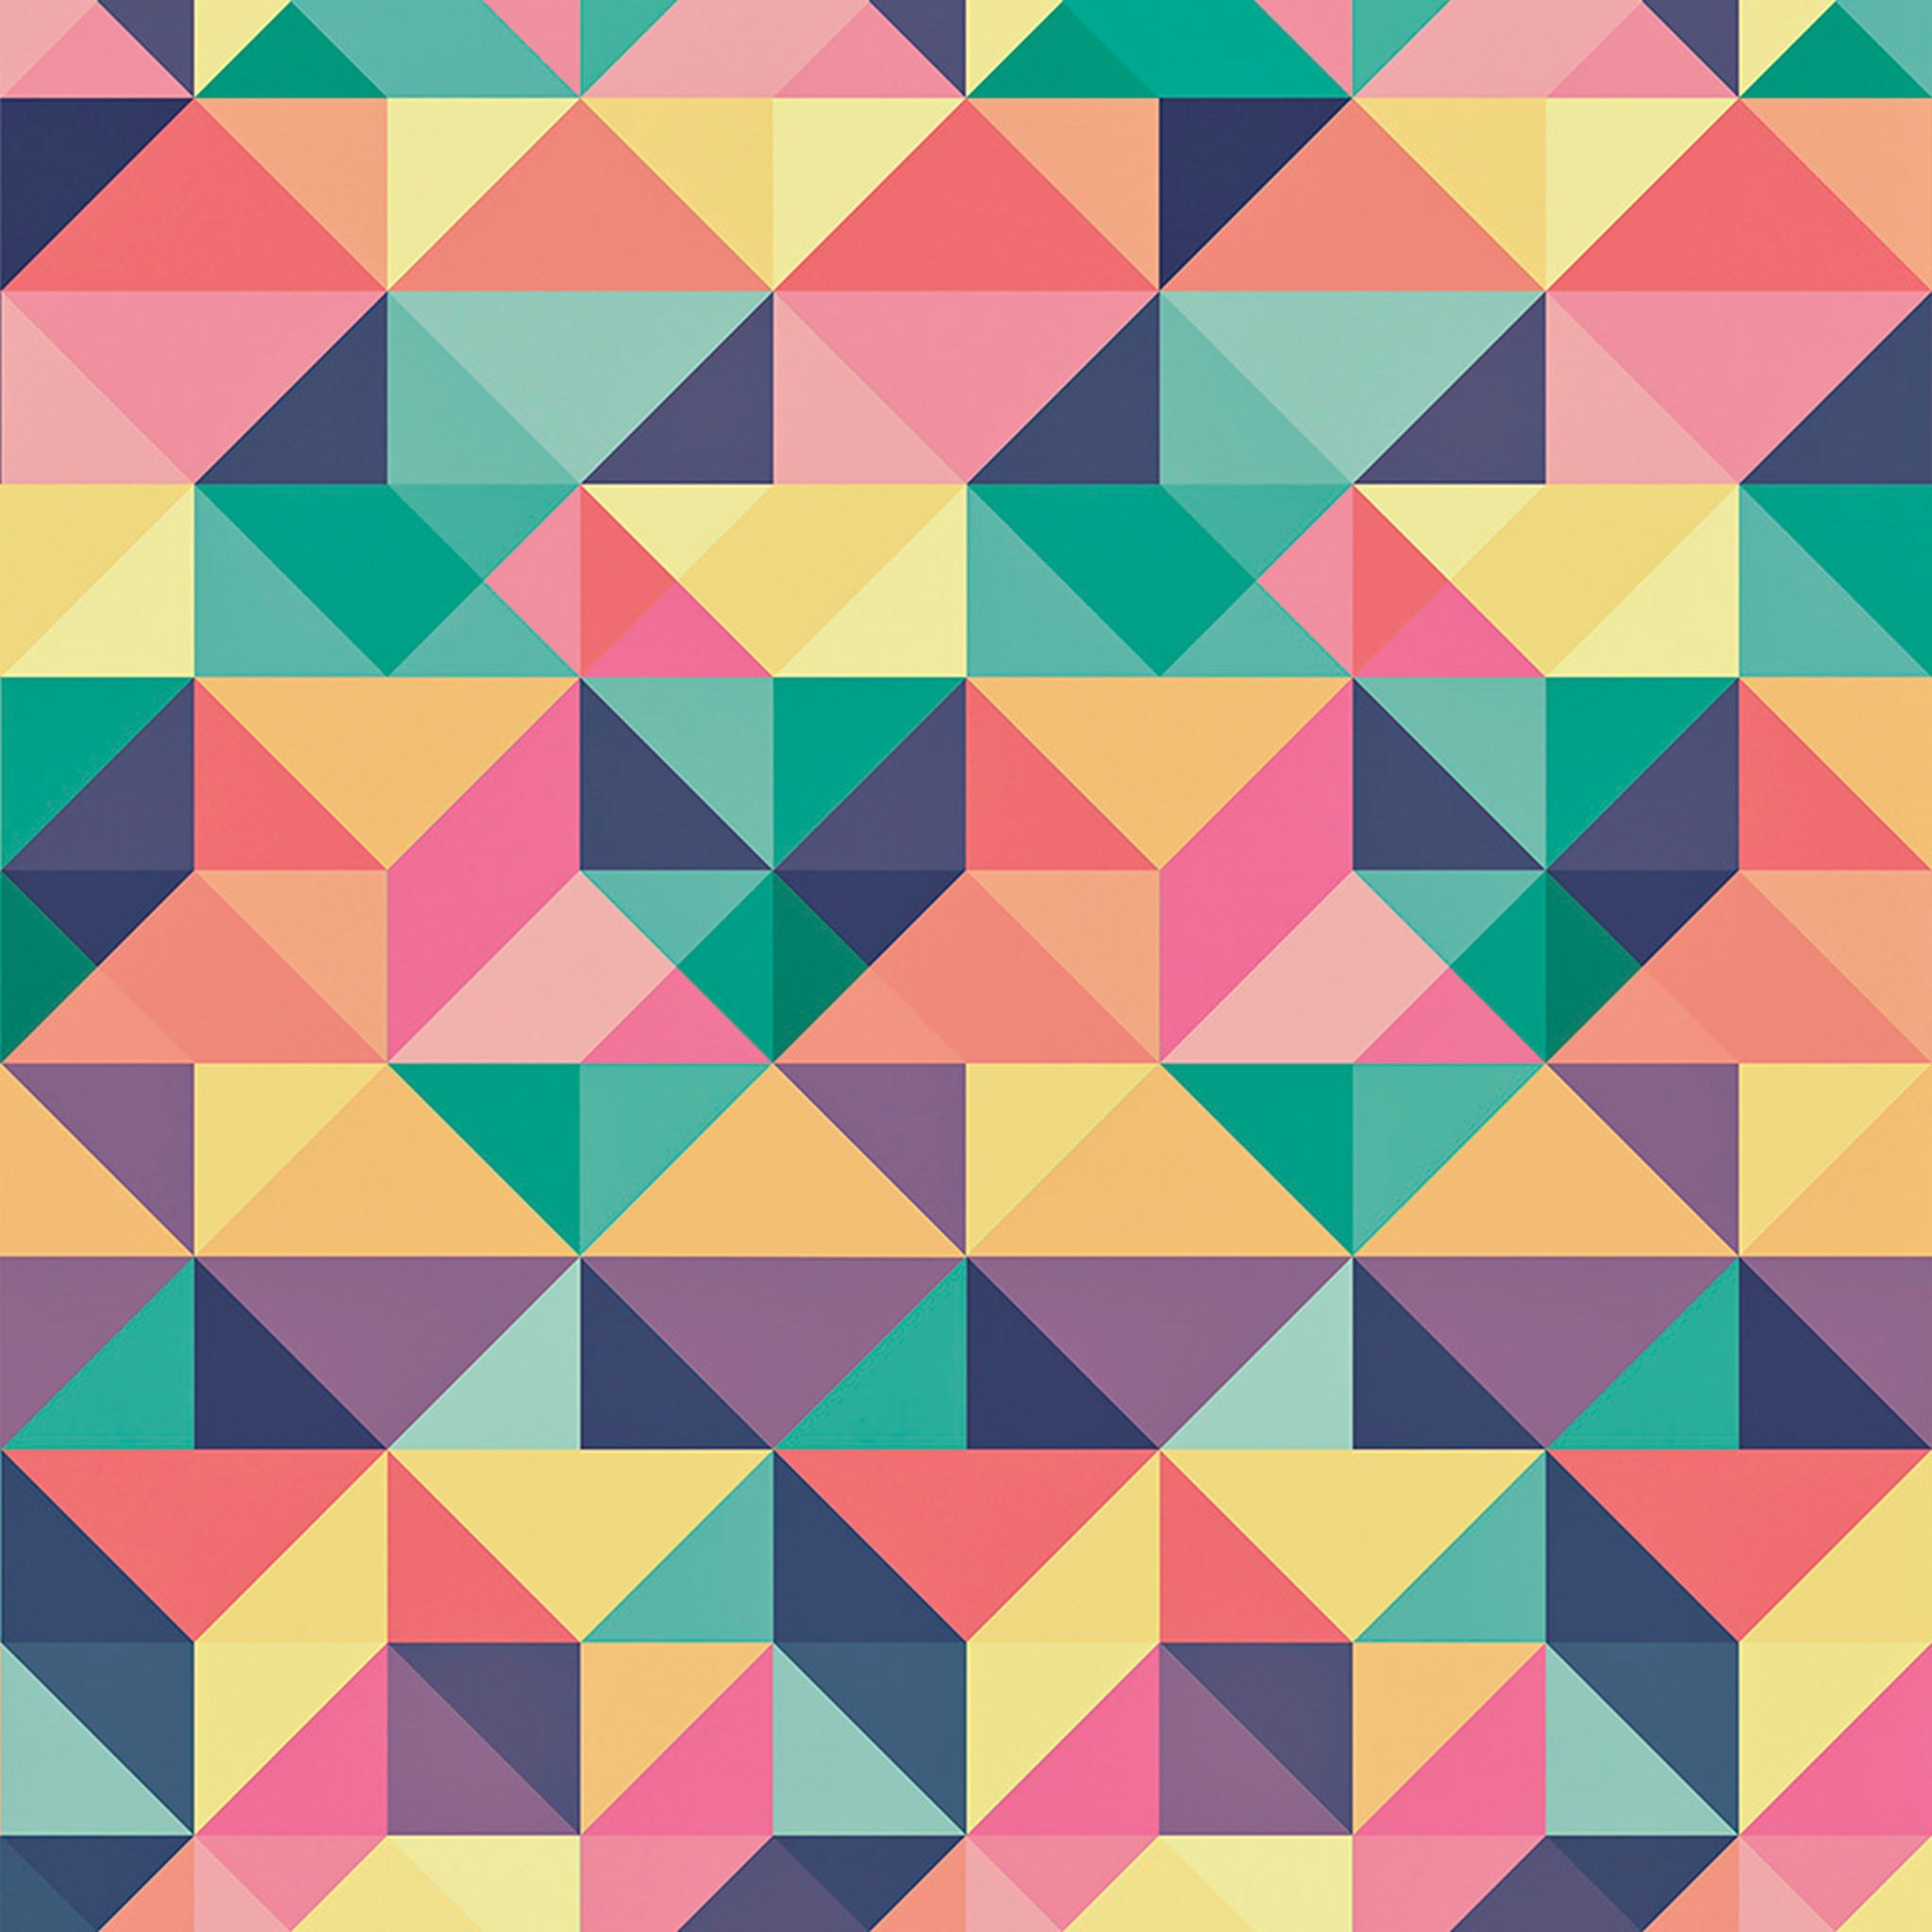 New Artistic Pattern Wallpapers